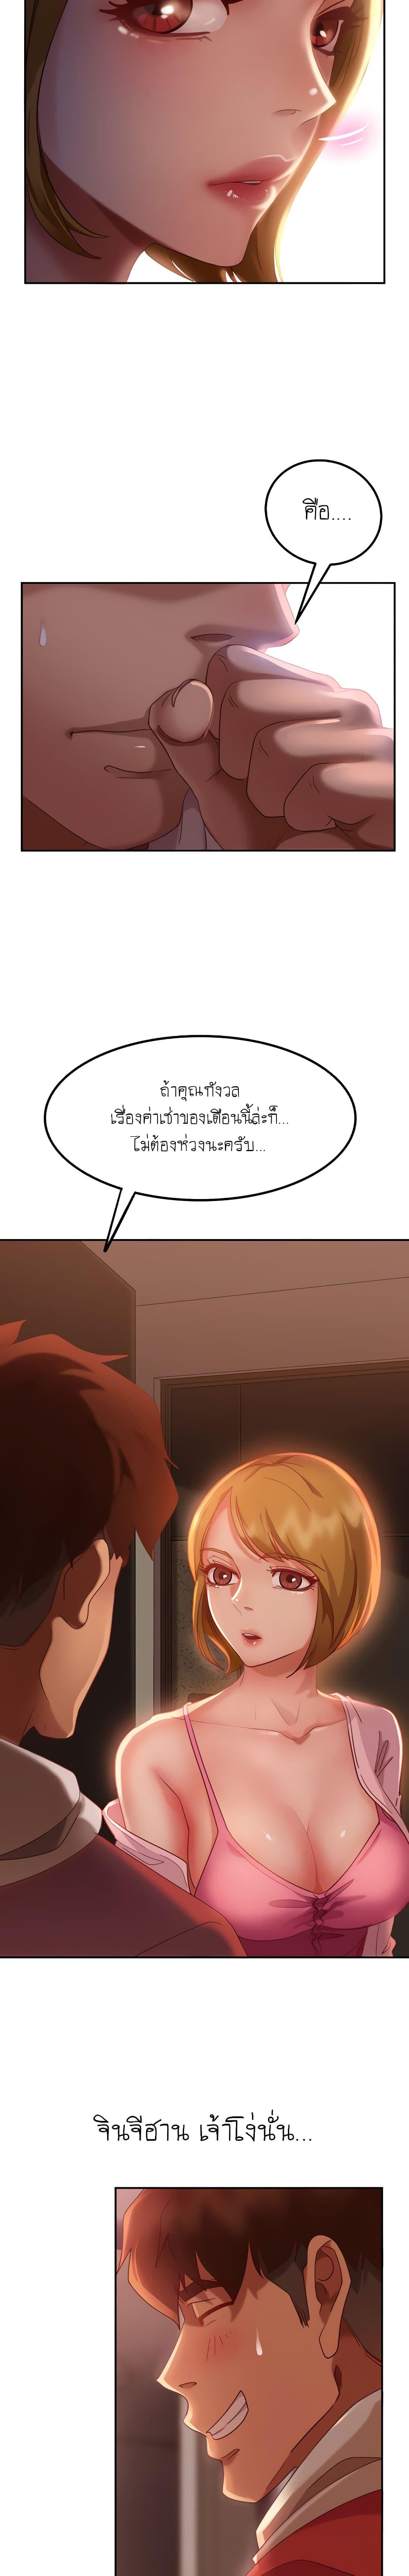 A Twisted Day 3 ภาพ 3